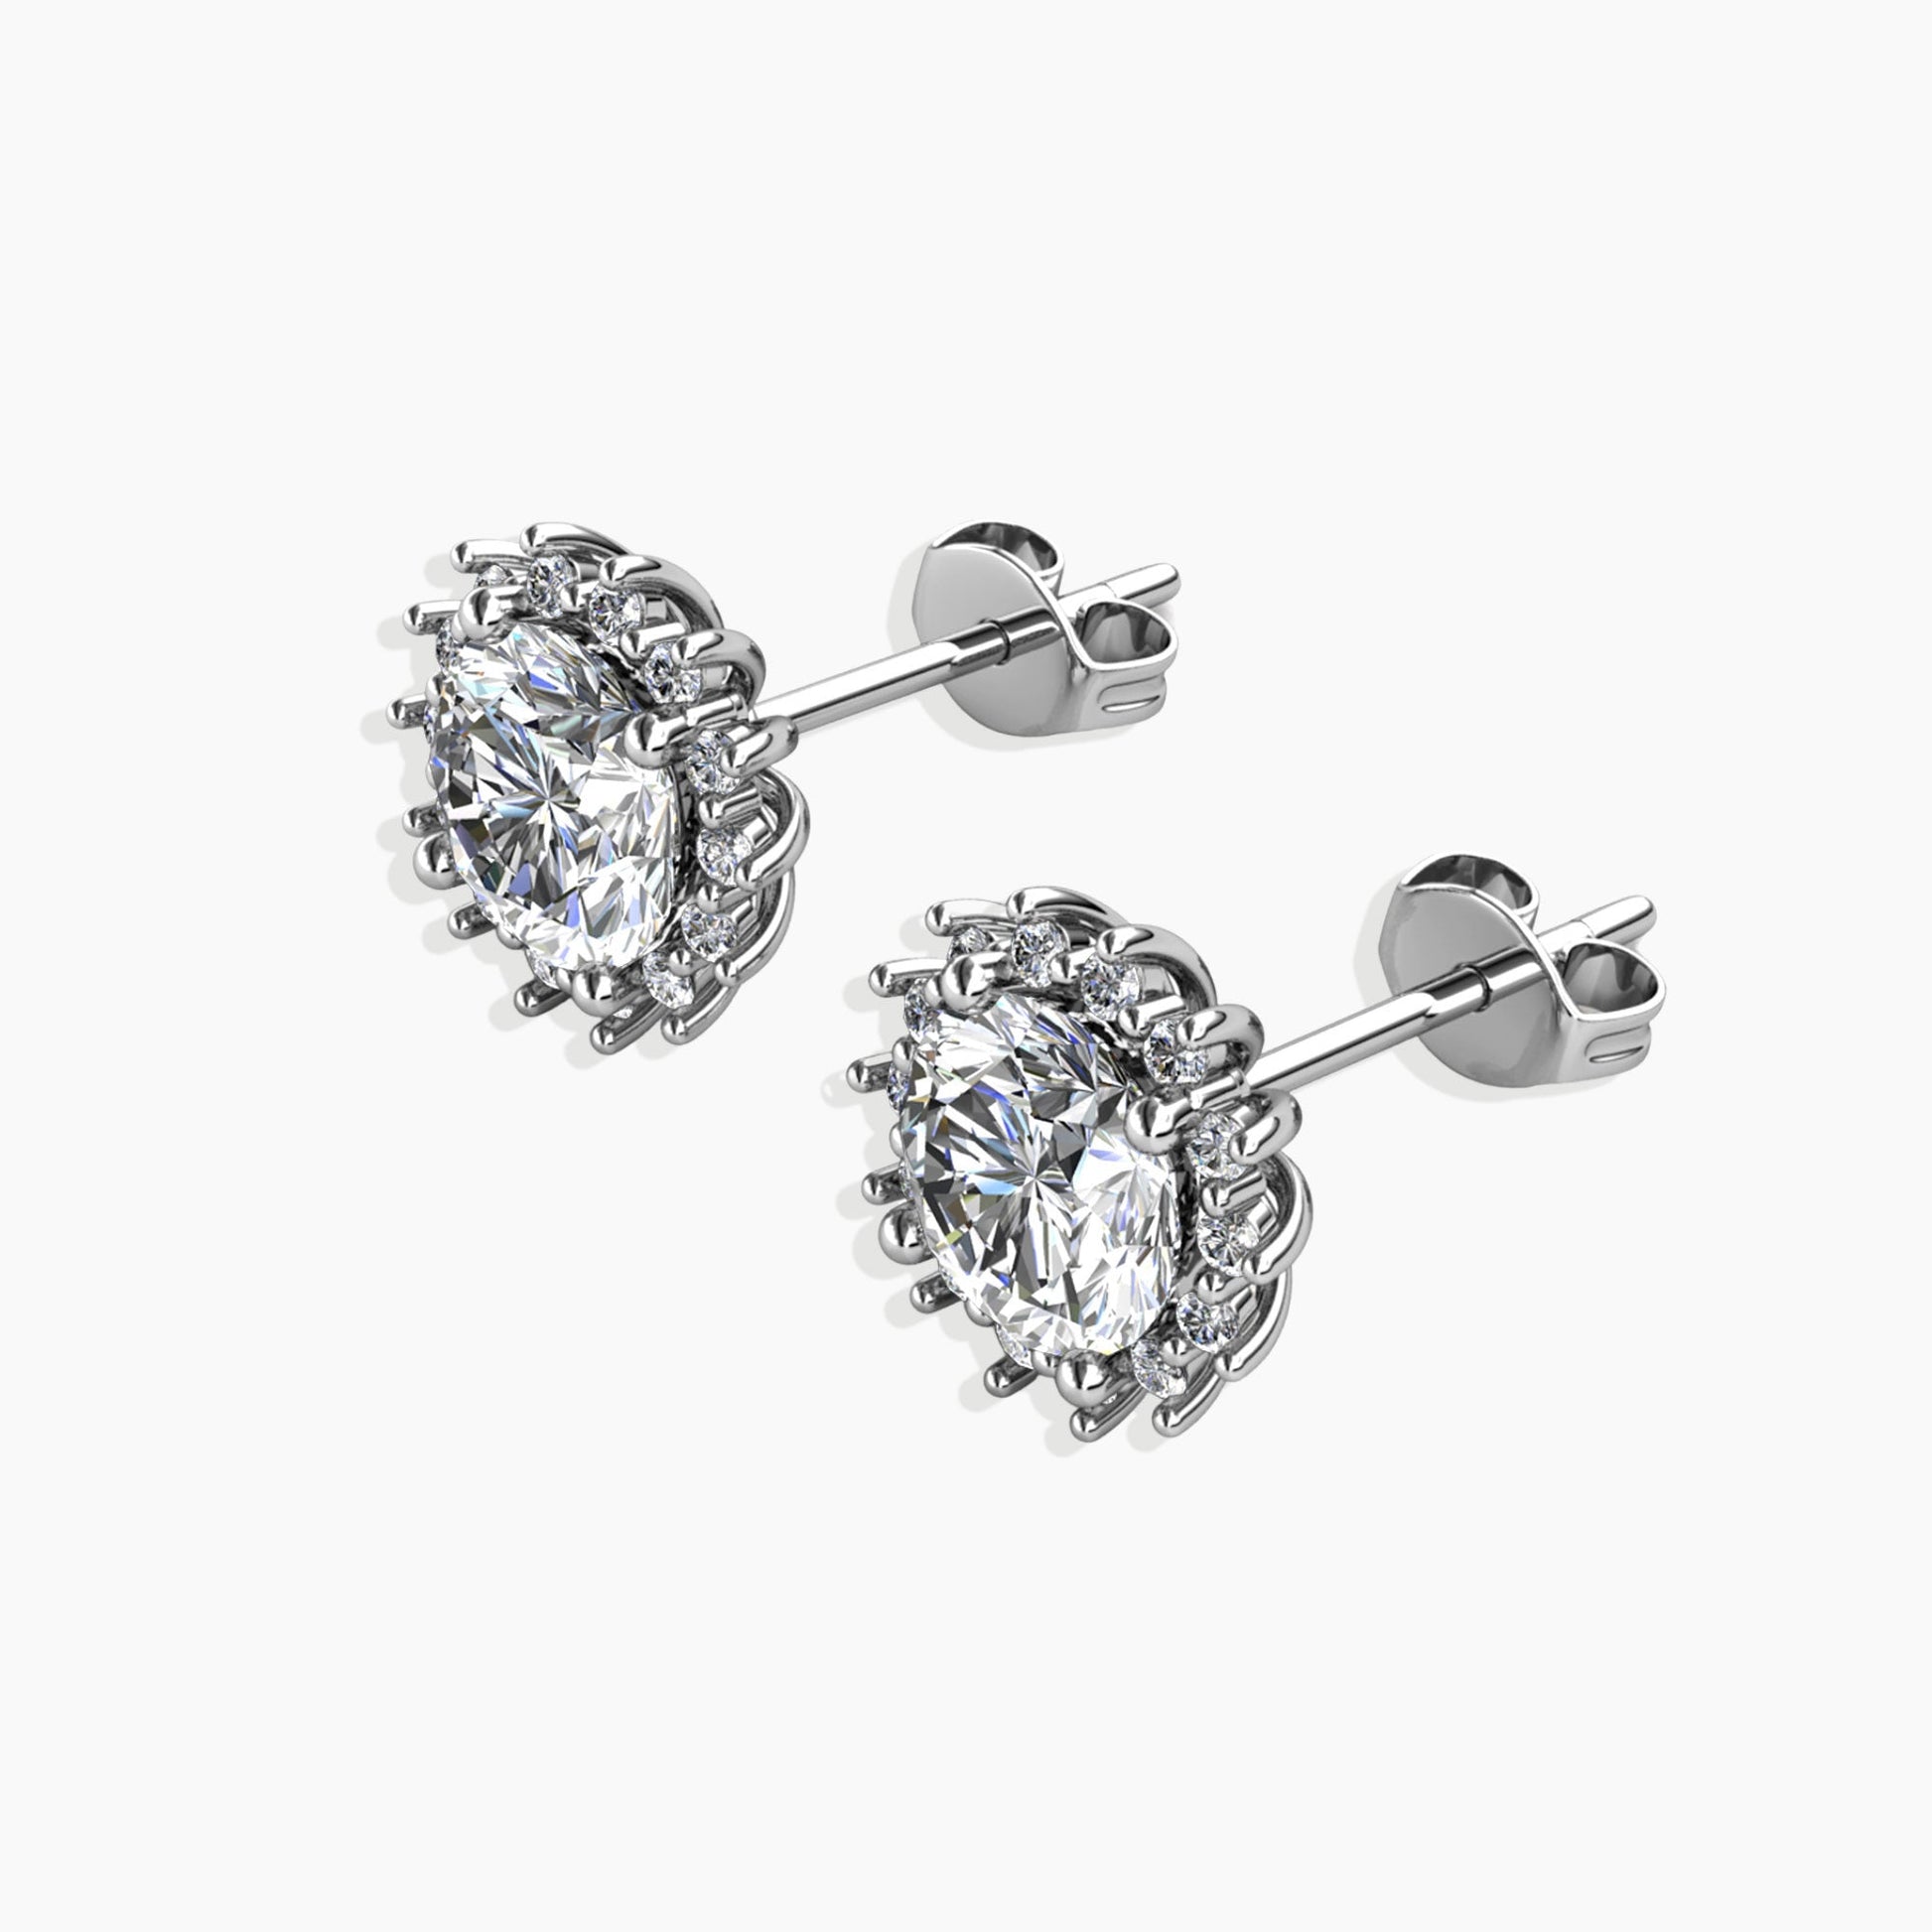 Side view of the Moissanite 1ct. Studs, displaying their sleek and elegant profile.